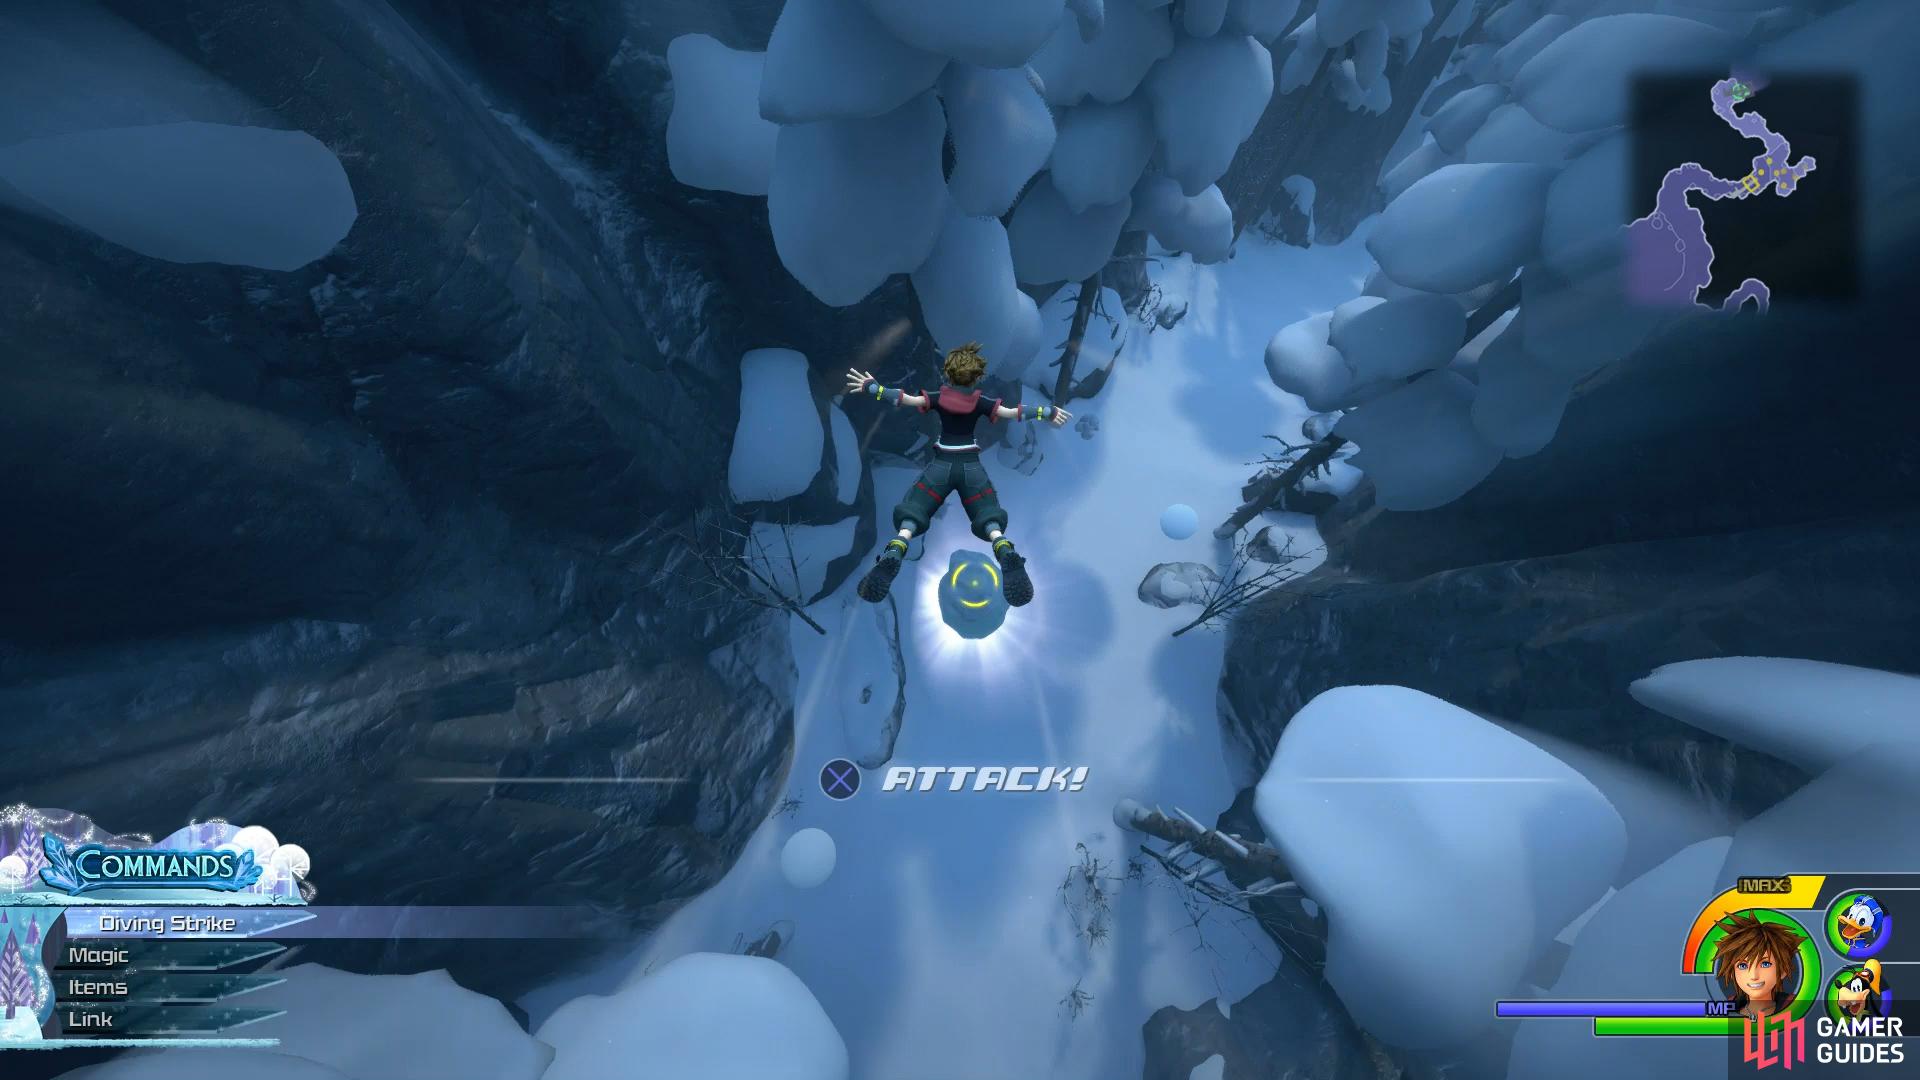 smash the ice while falling to reveal a chest.